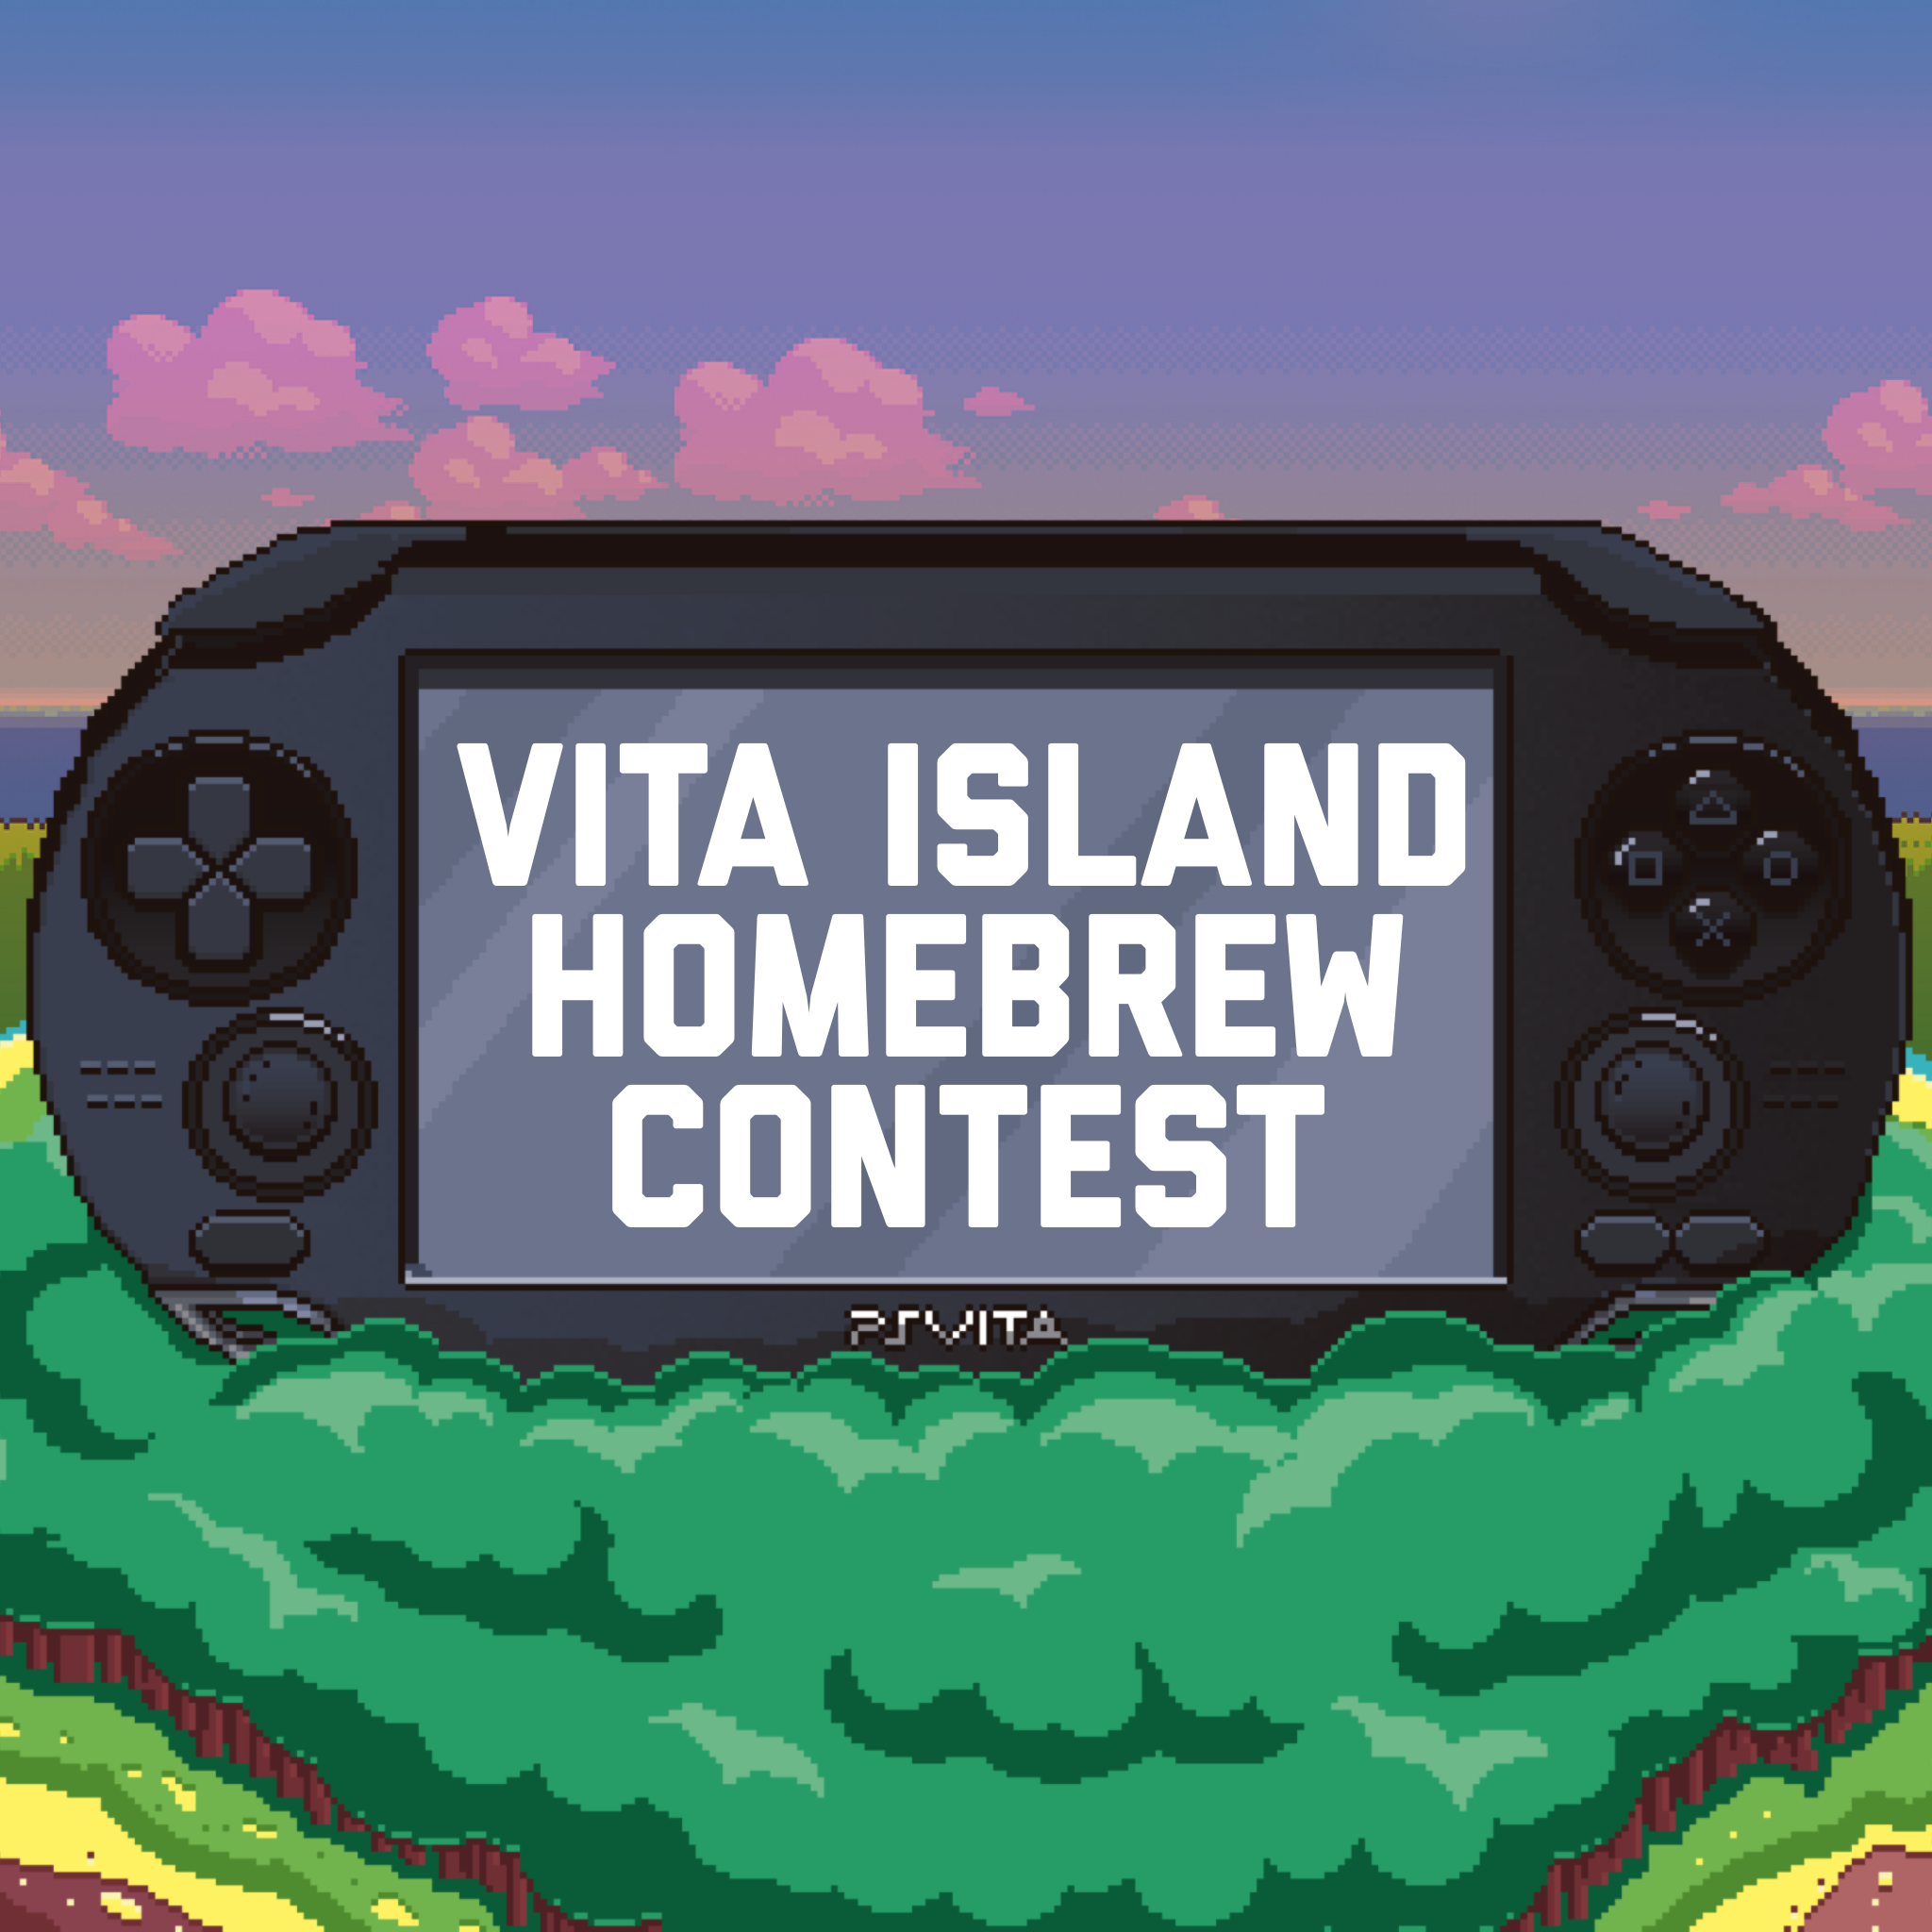 GekiHEN: Homebrew contest for the PS Vita - $800 in cash prizes to win 